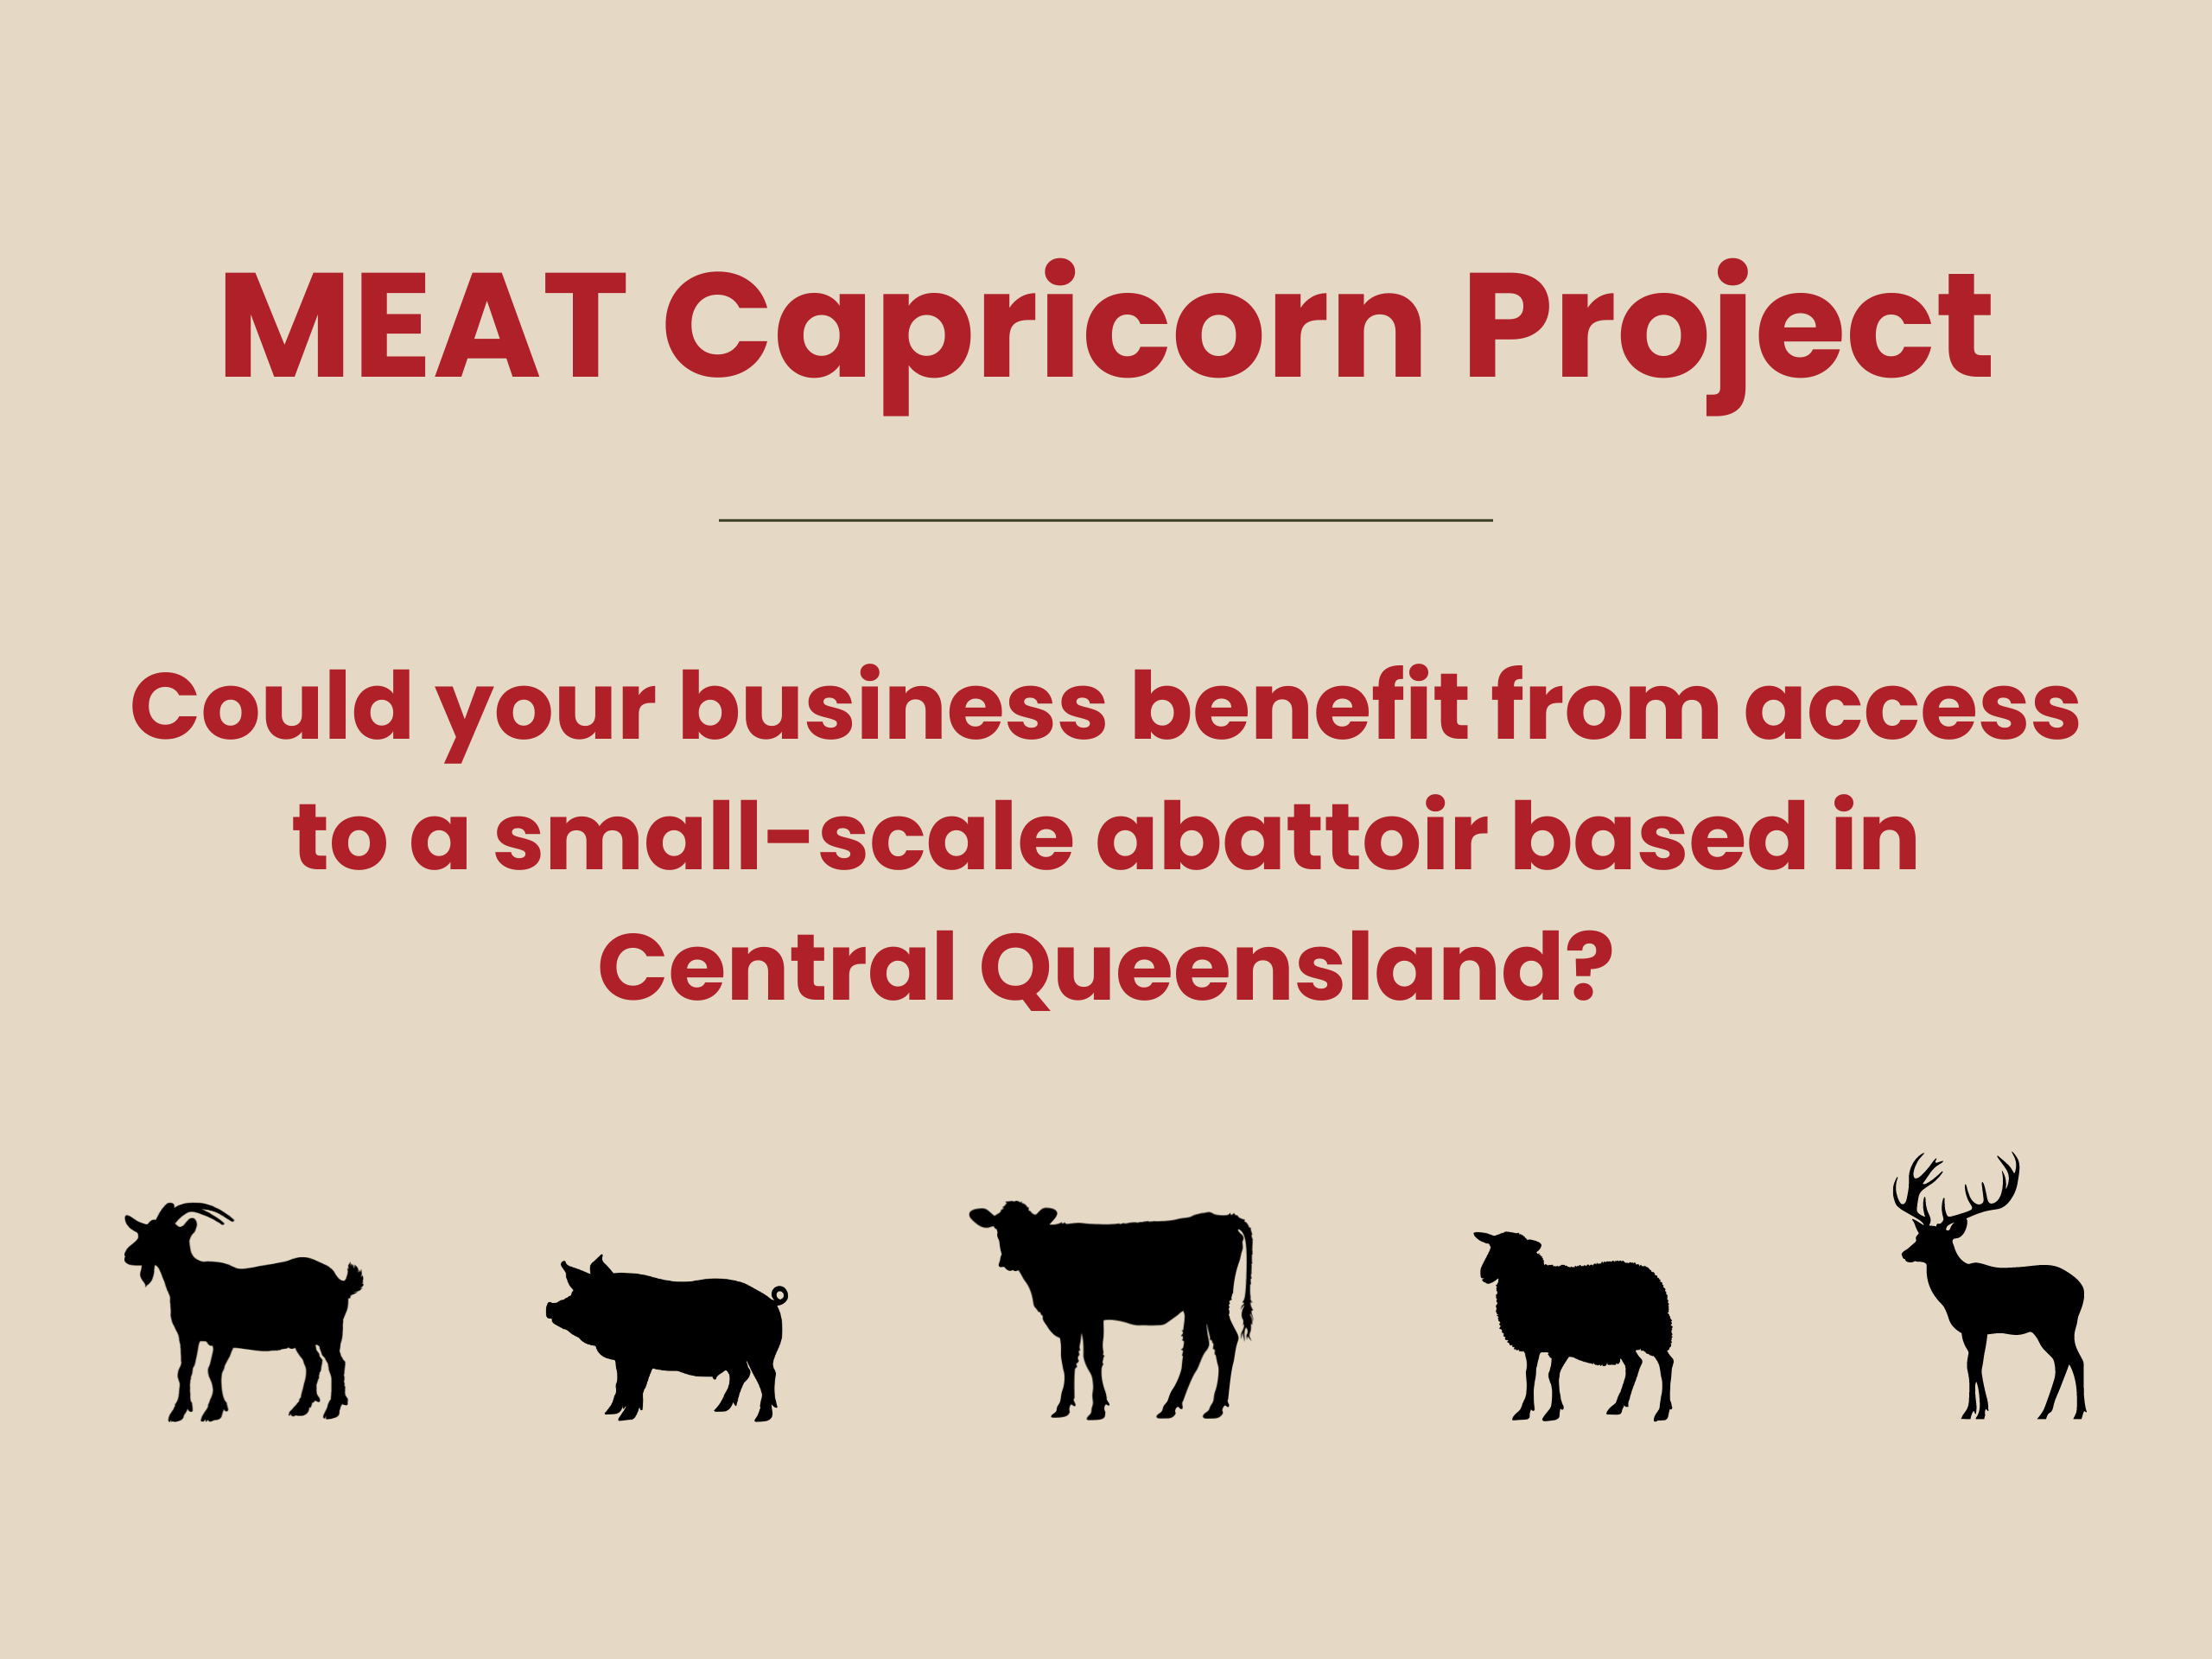 Could your business benefit from access to a small-scale abattoir based in Central Queensland?